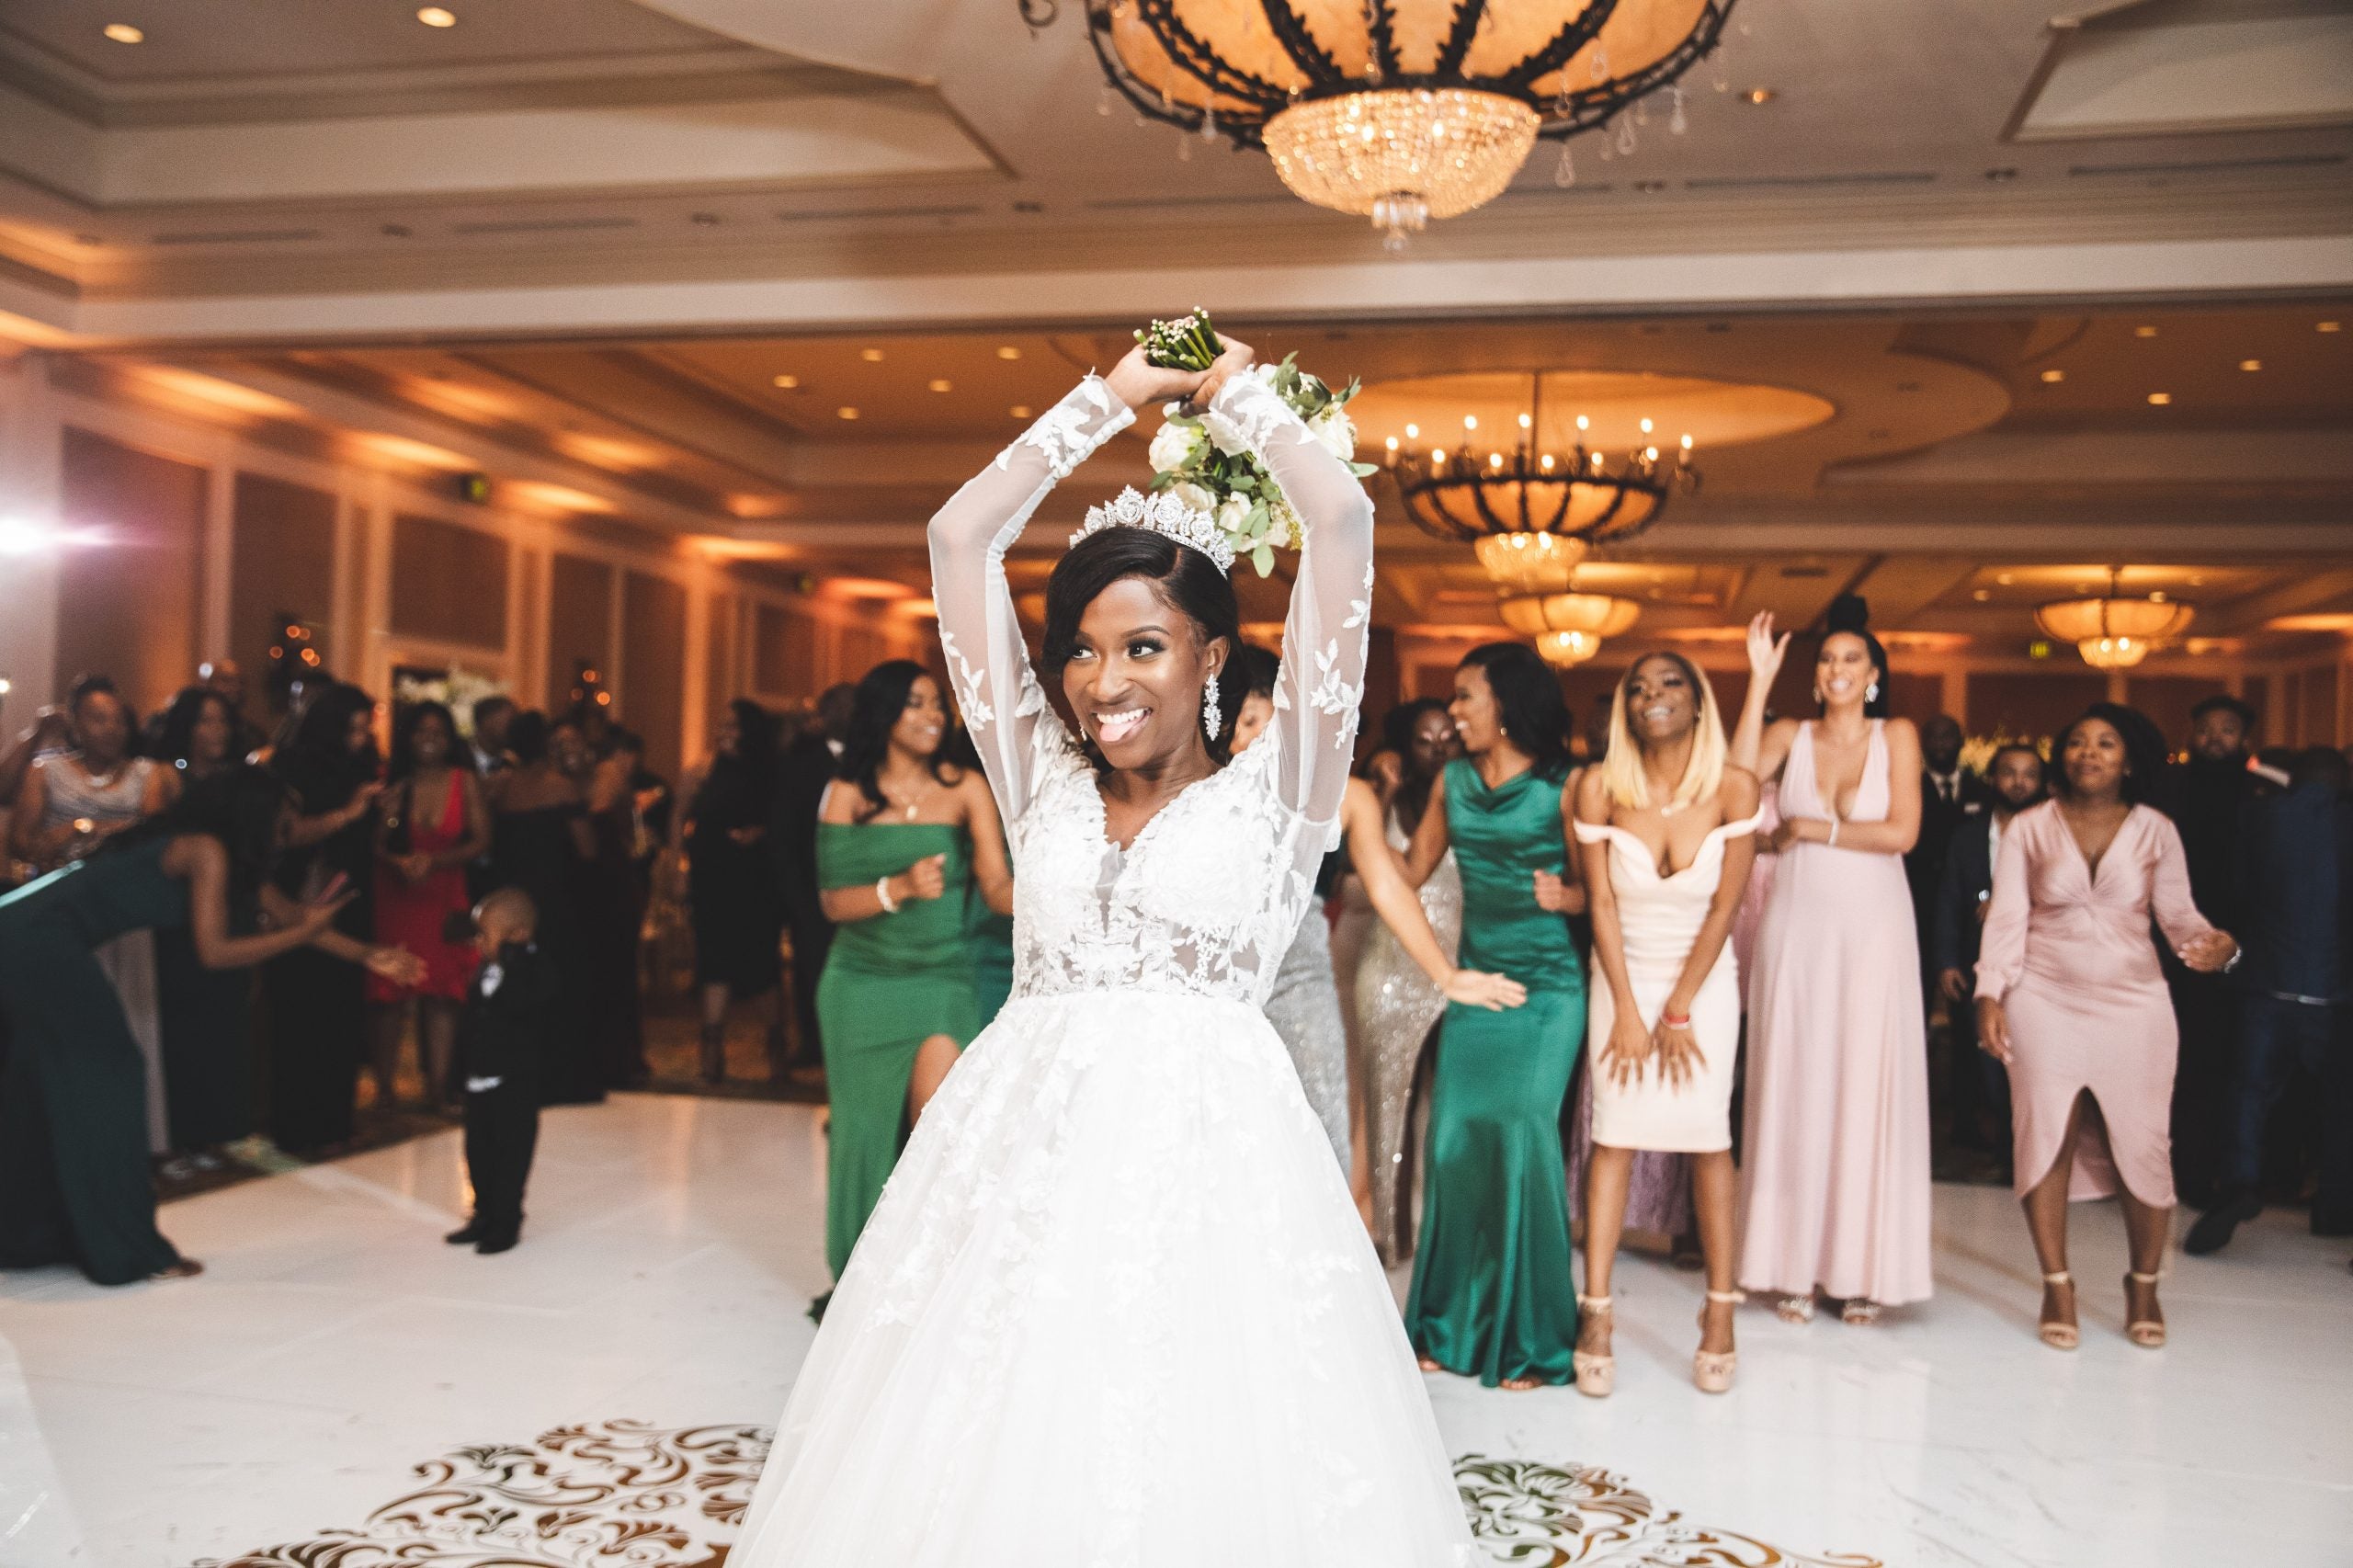 Bridal Bliss: Lucile and Dorson Brought Haitian Pride To Their Winter Wedding Reception